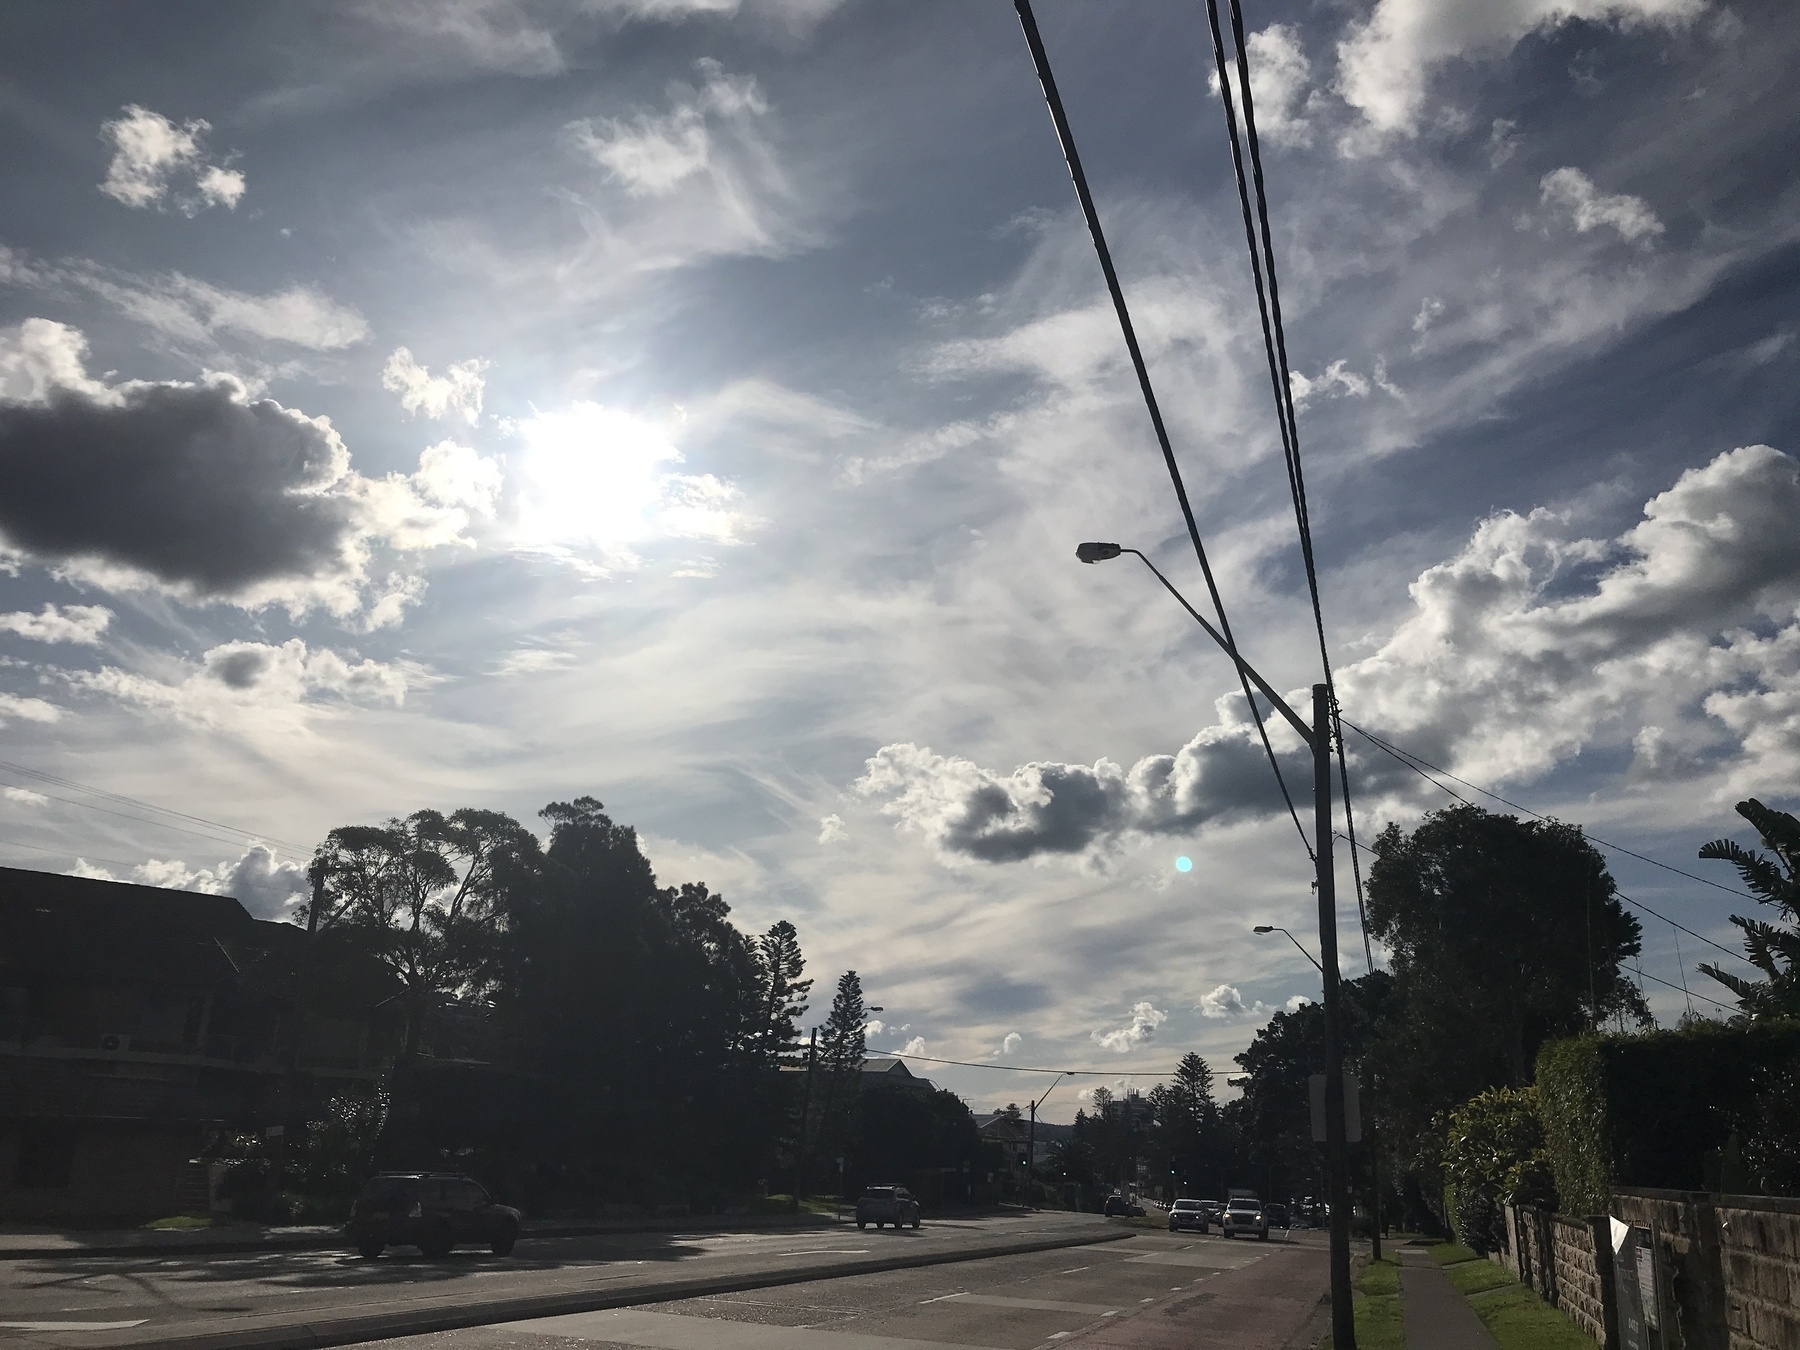 The sun is a hot white glow behind a bank of cloud, in a late afternoon sky alive with cloud formations. Deeply shadowed cumulus hangs above the ground like storm clouds, and higher up there are wisps, slashes and trails of white and grey against grey blue rivers of sky. The foreground is a main road edged with suburban blocks, receding into the distance. One side is in deep shade. On the other stands a telegraph pole, in crisp silhouette, with a street light arching over the roadway and three overhead cables exiting the top of the frame. Tall trees rise in silhouette against the glare, and a small blue disc of lens flare hangs like a second sun.